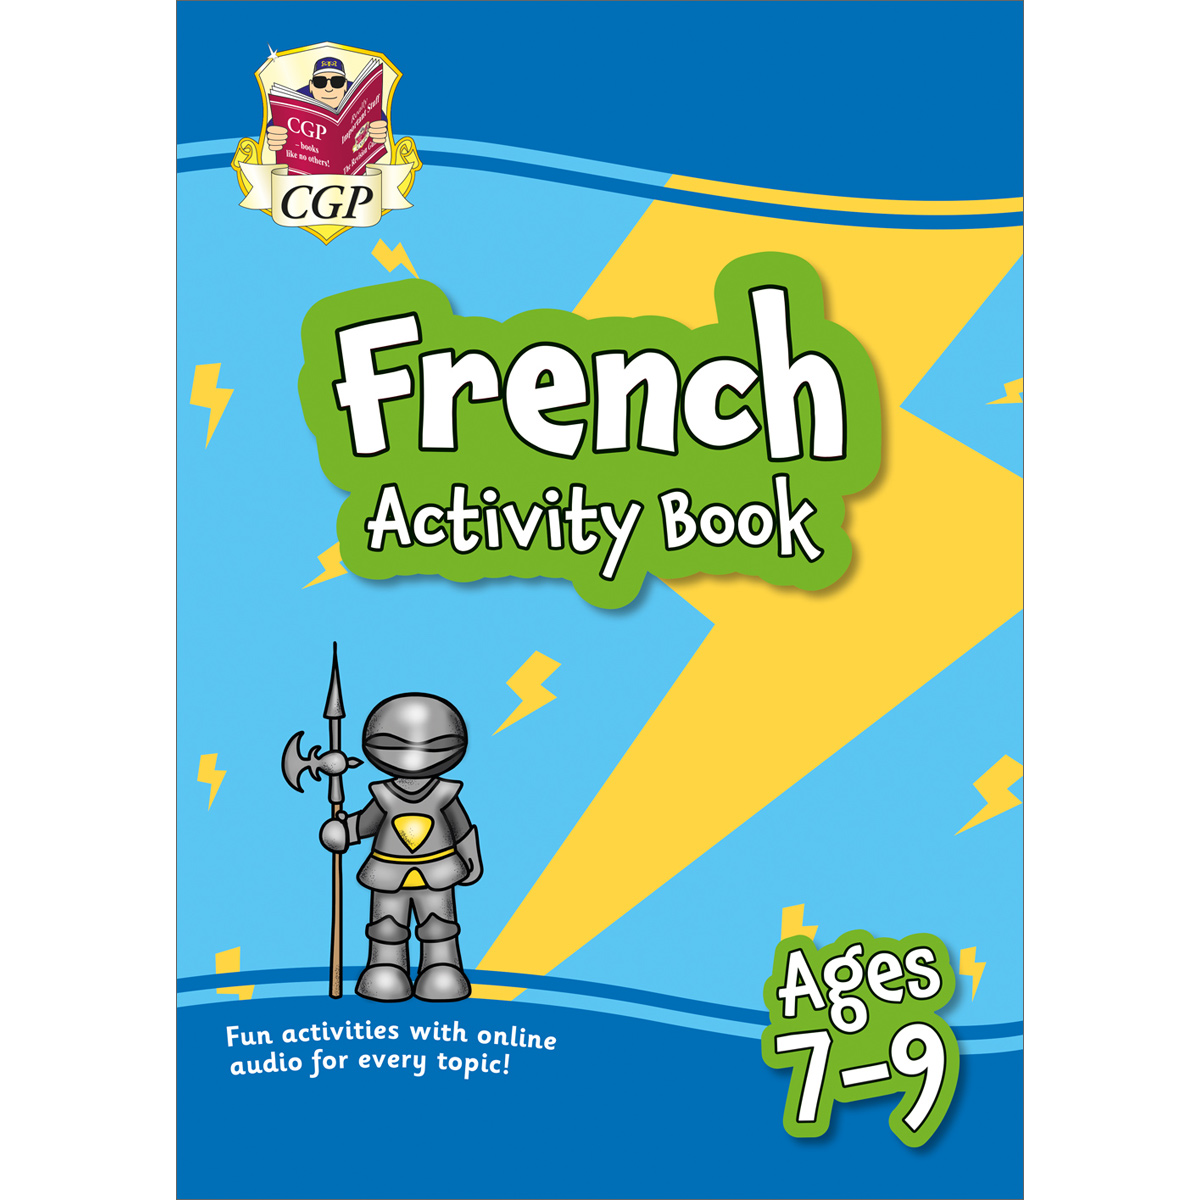 CGP French Activity Book: Ages 7-9